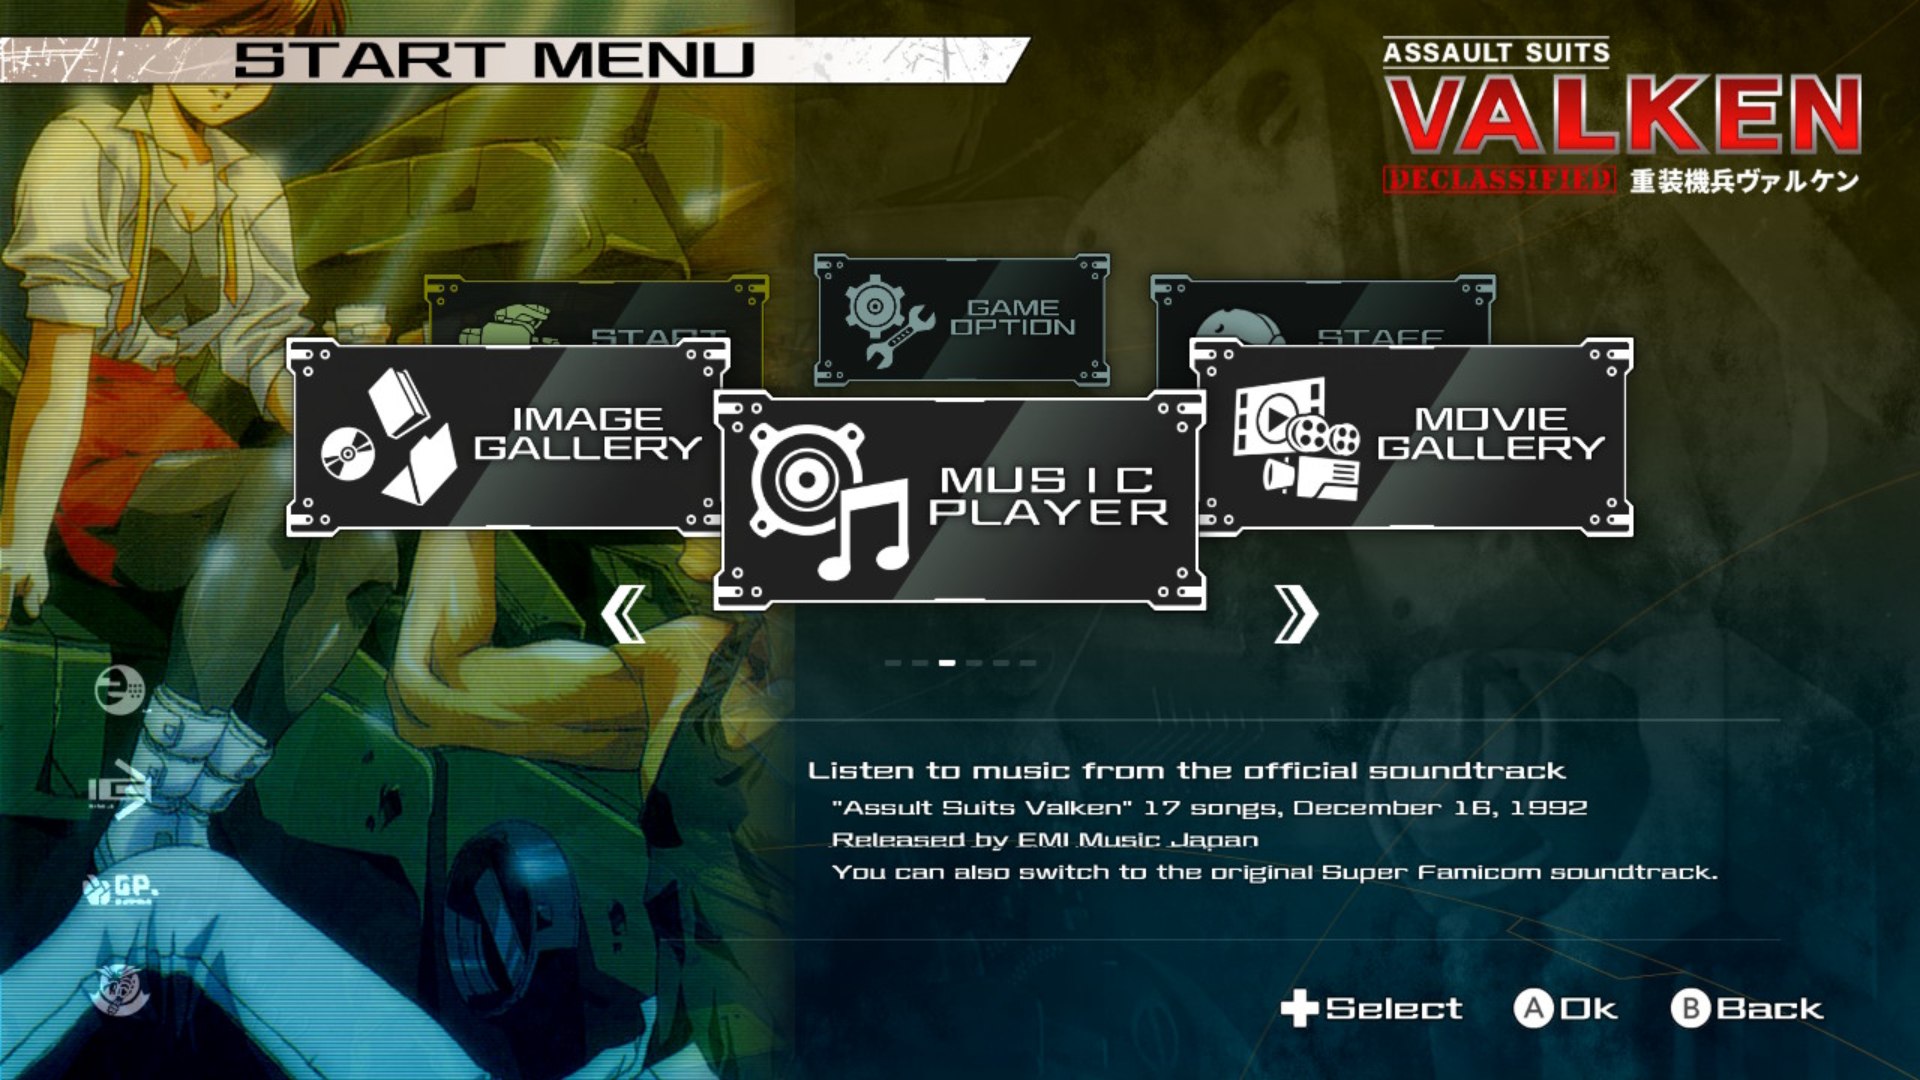 Assault Suits Valken DECLASSIFIED main menu shows music player image gallery and movie gallery icons with an image from the game in the background